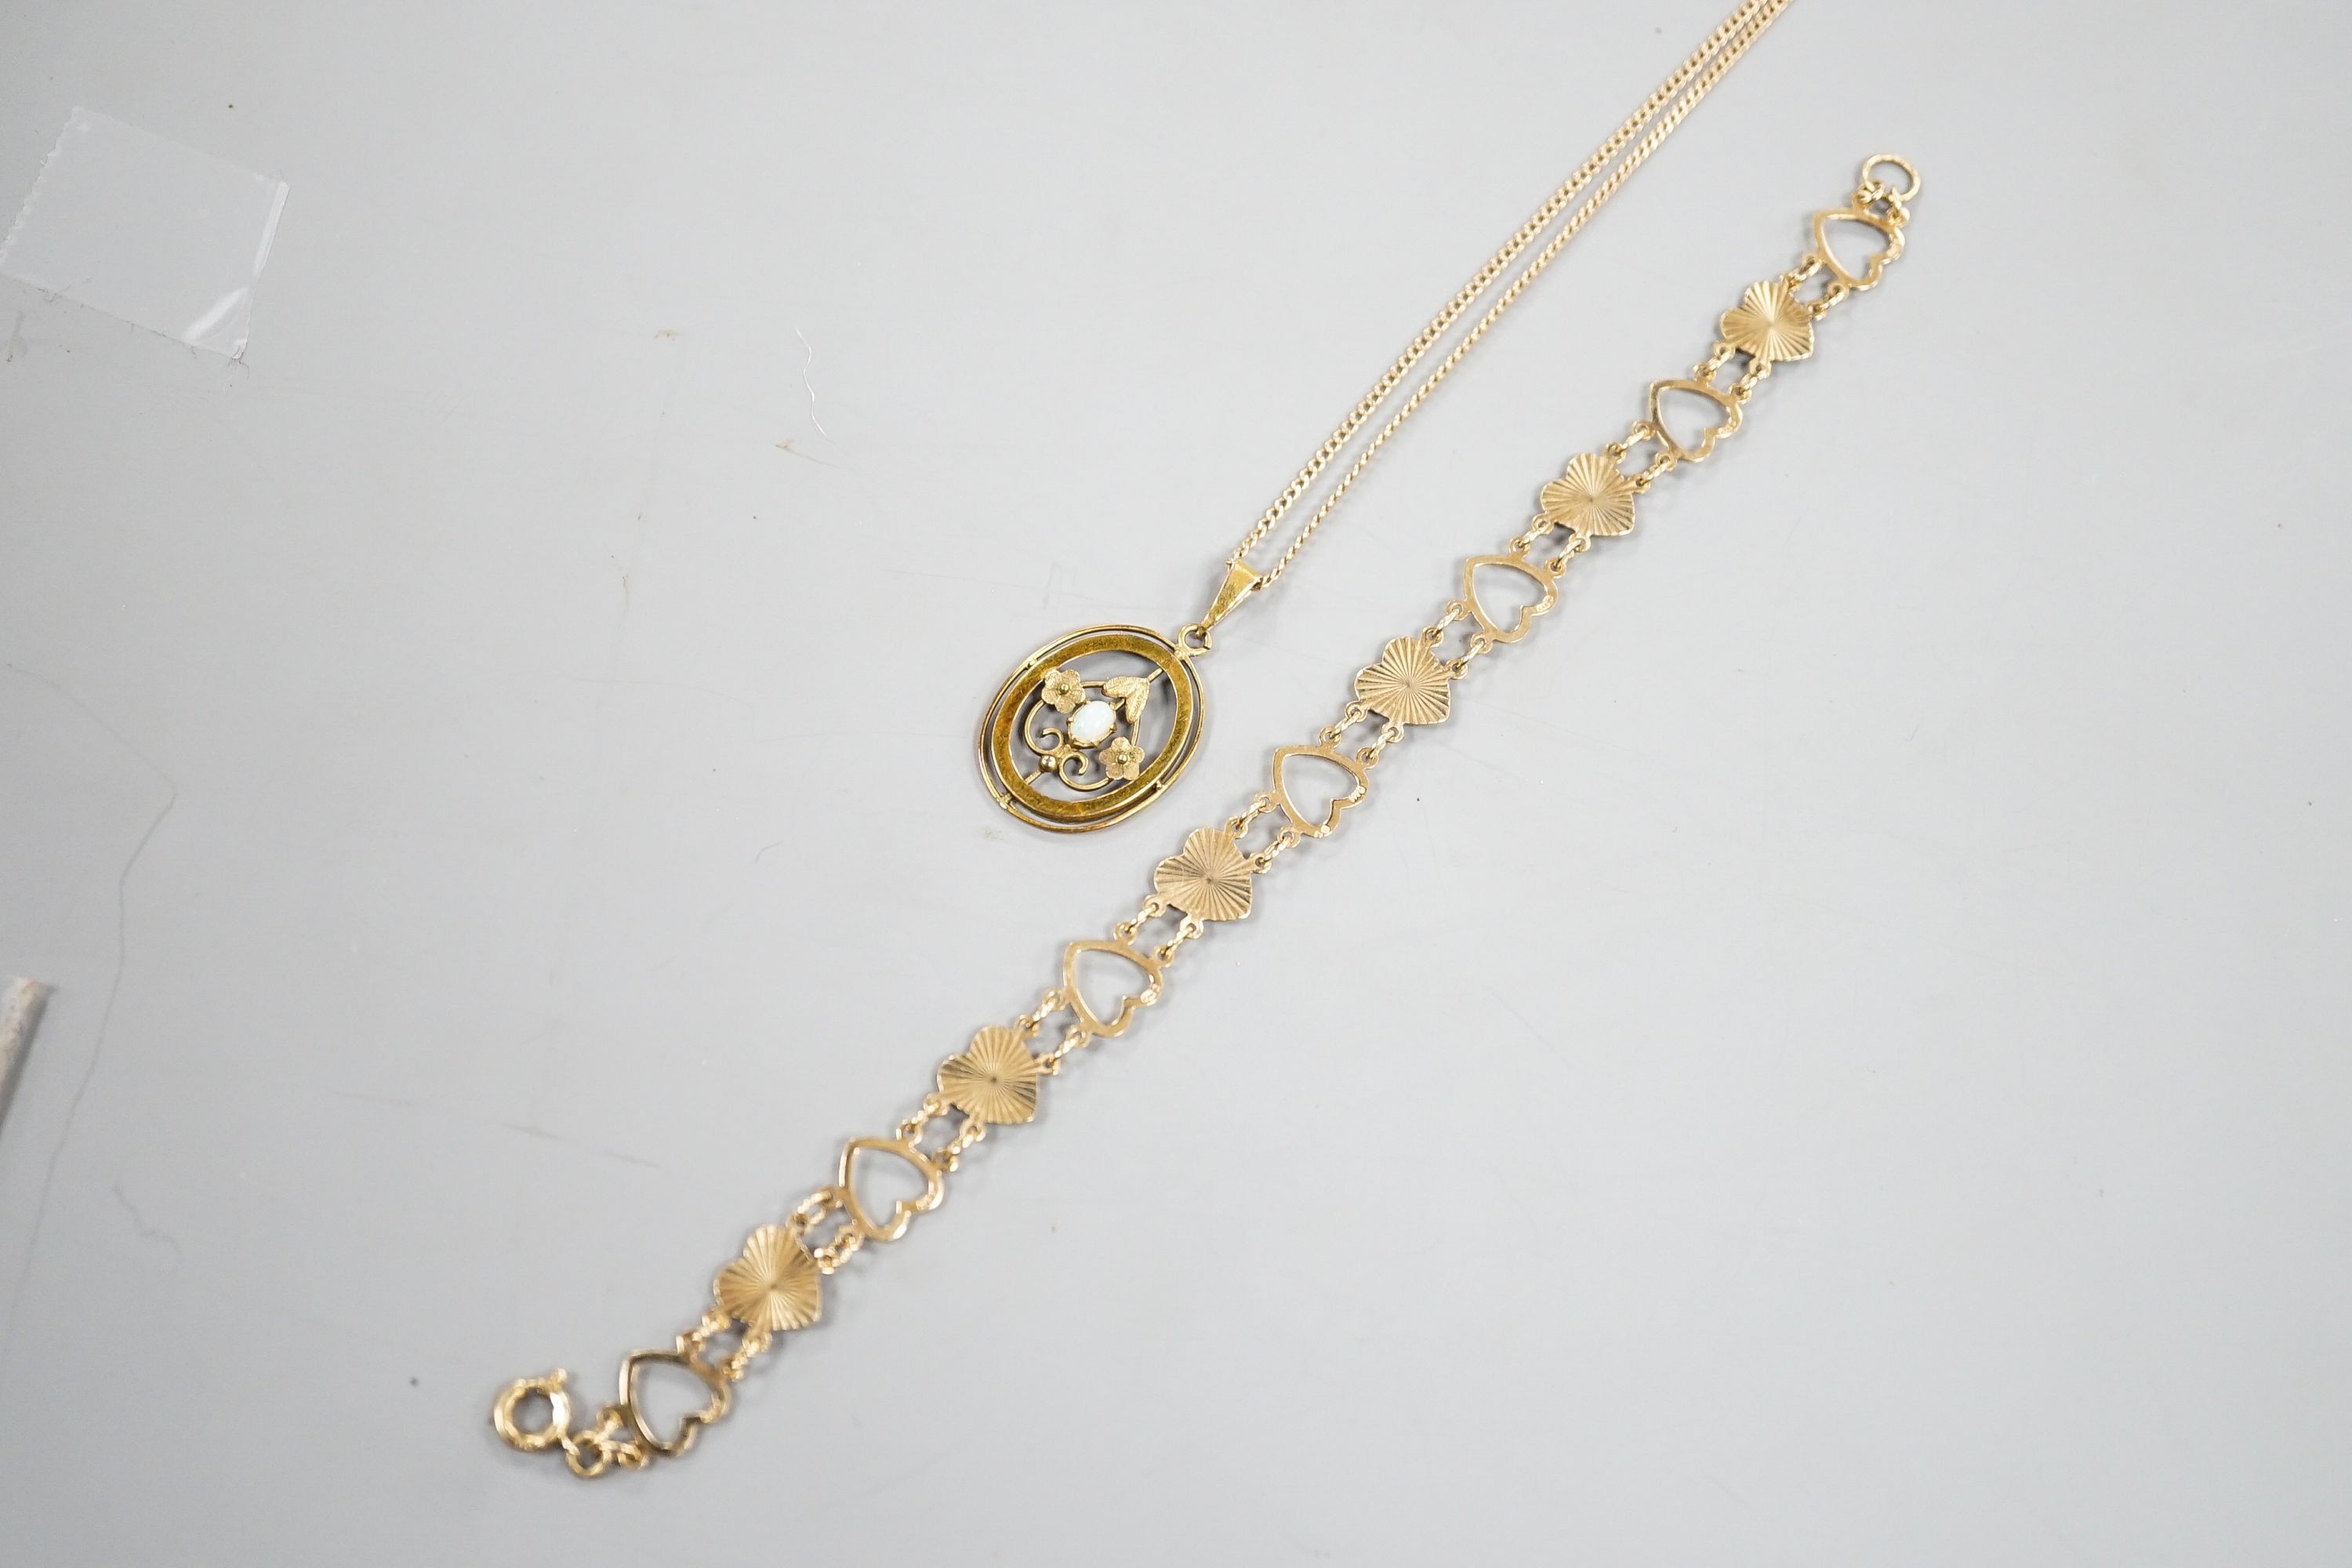 A 9ct and heart shaped link bracelet, 18cm and a yellow metal and opal pendant on a yellow metal chain